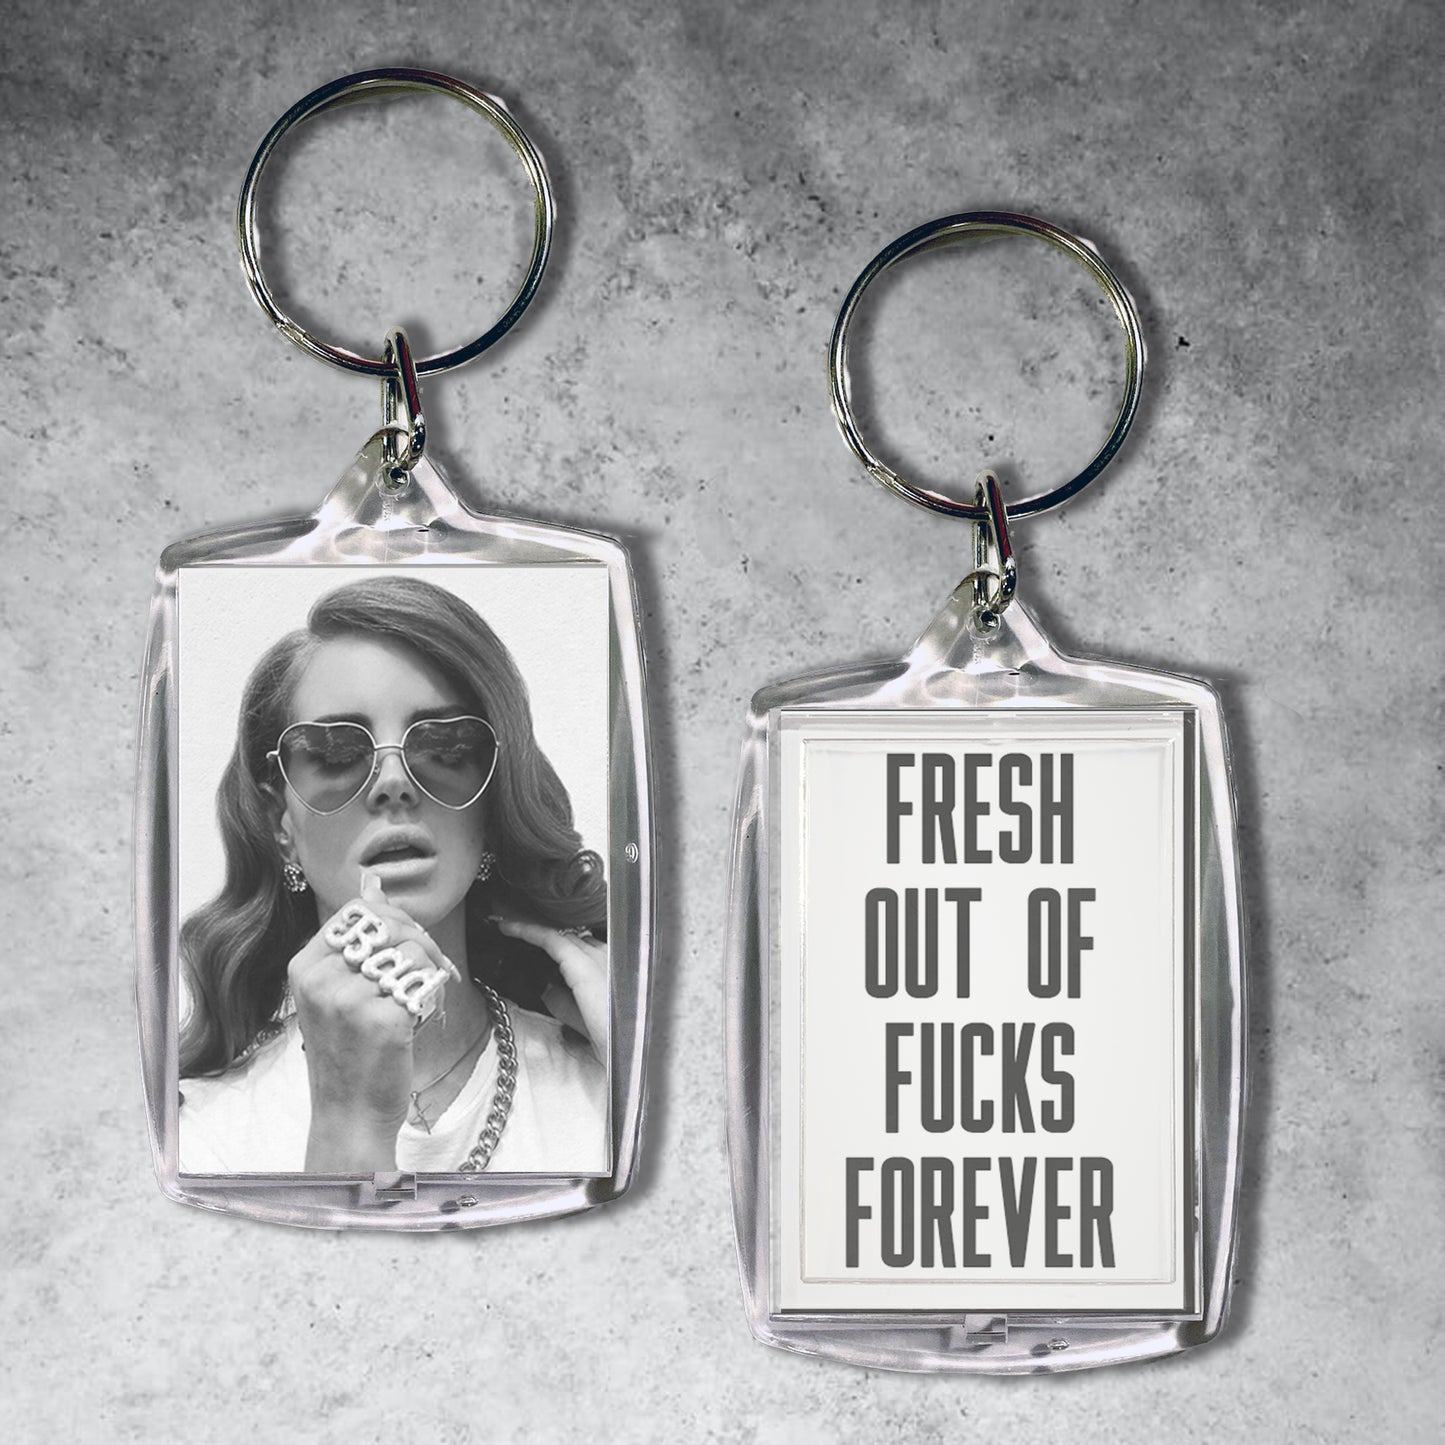 fresh out of fucks forever keychain